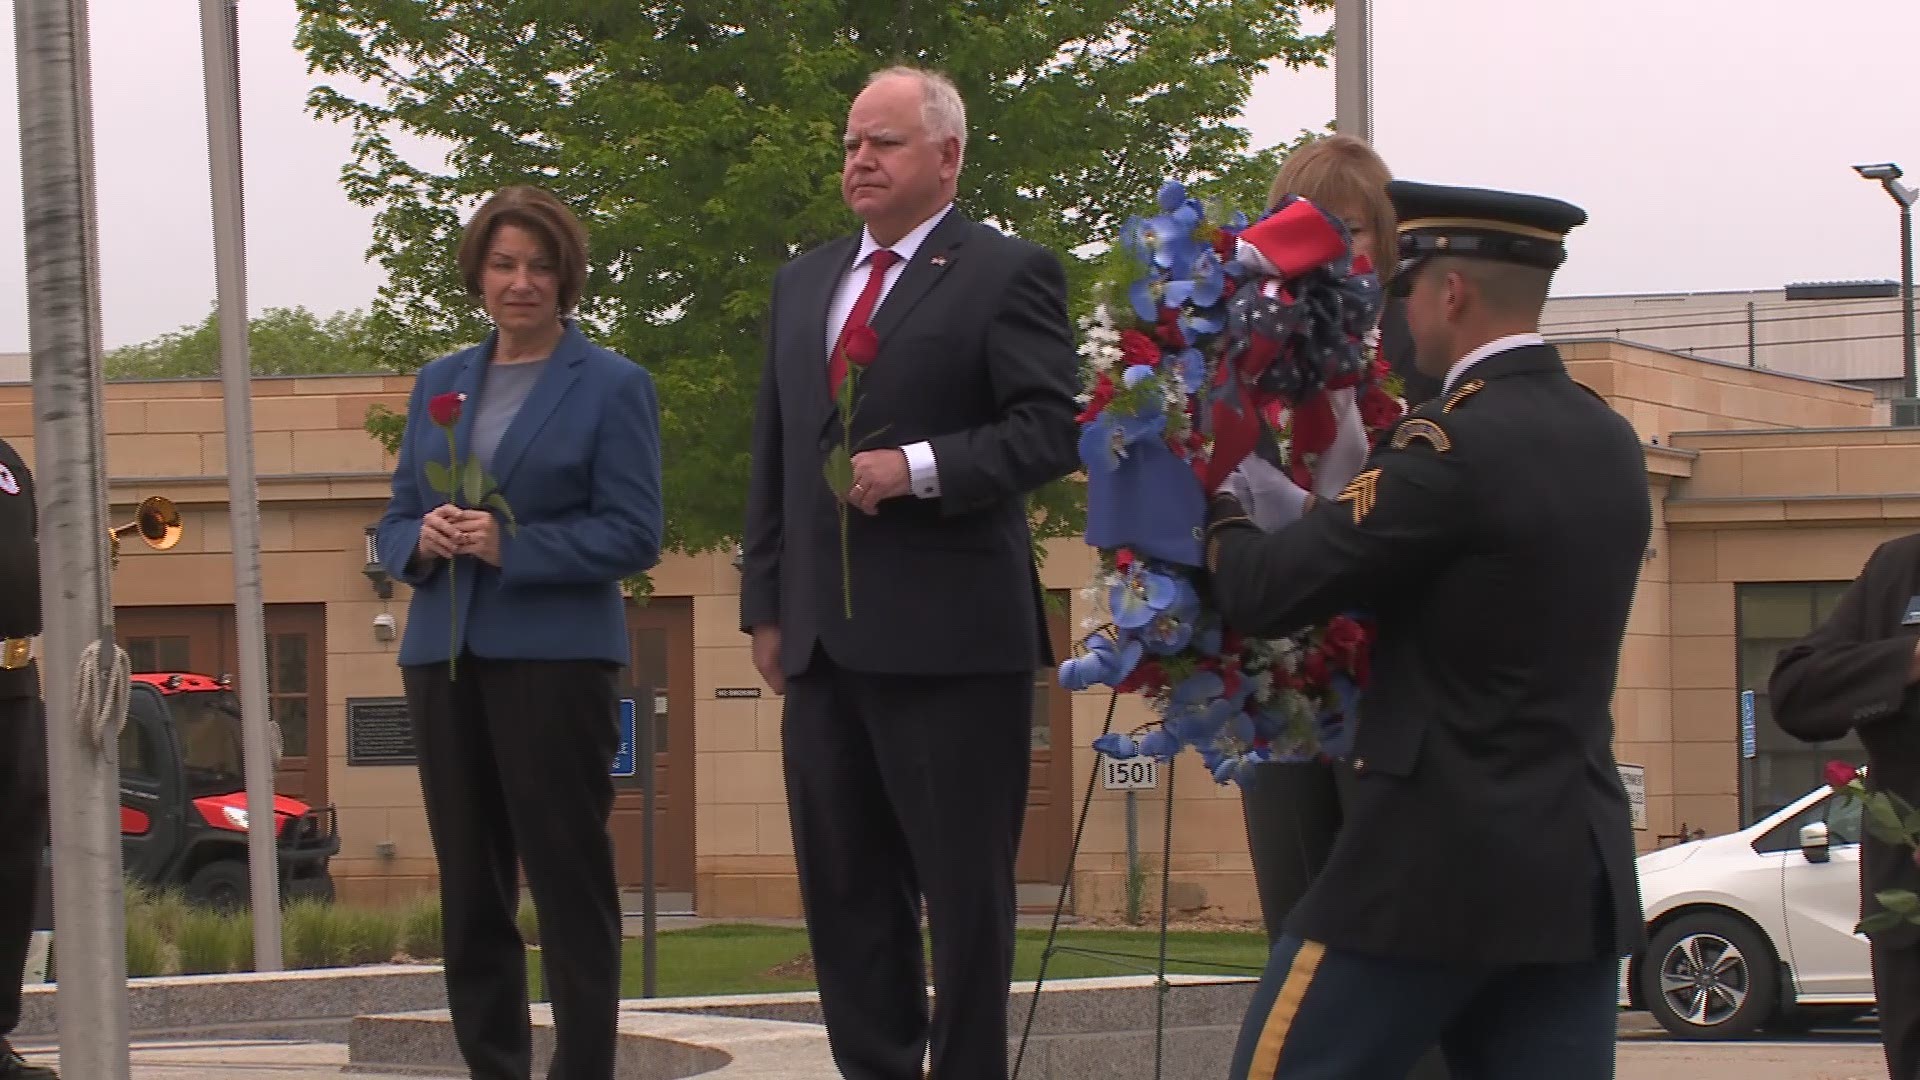 Minnesota Governor Tim Walz and U.S. Senators Amy Klobuchar and Tina Smith visited Fort Snelling for the annual Memorial Day wreath laying ceremony.